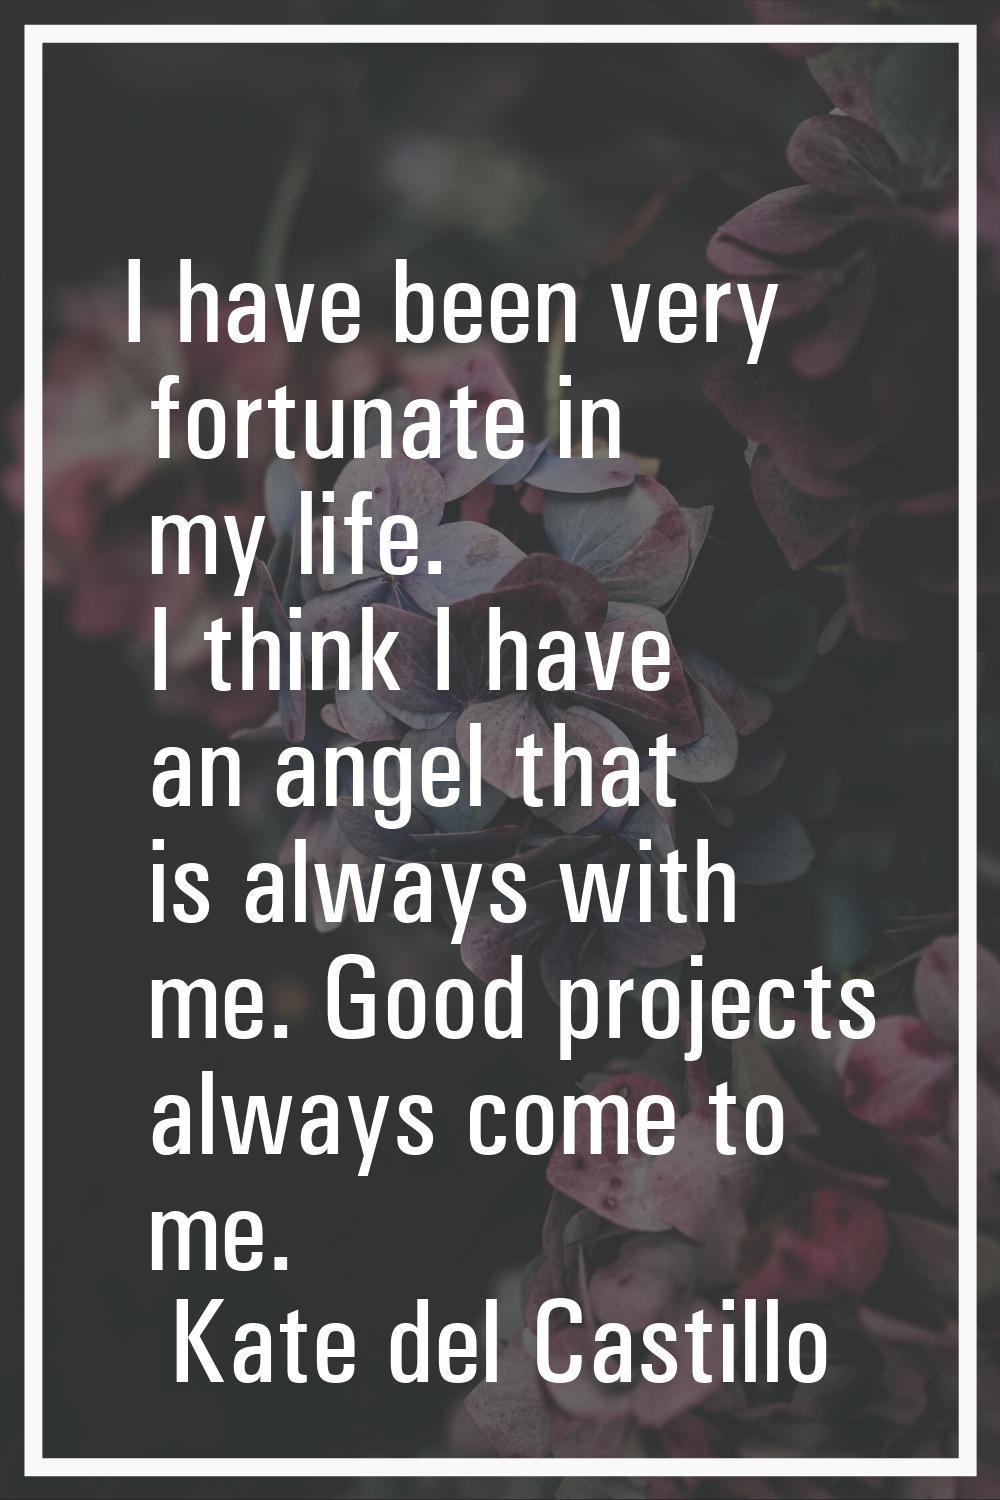 I have been very fortunate in my life. I think I have an angel that is always with me. Good project